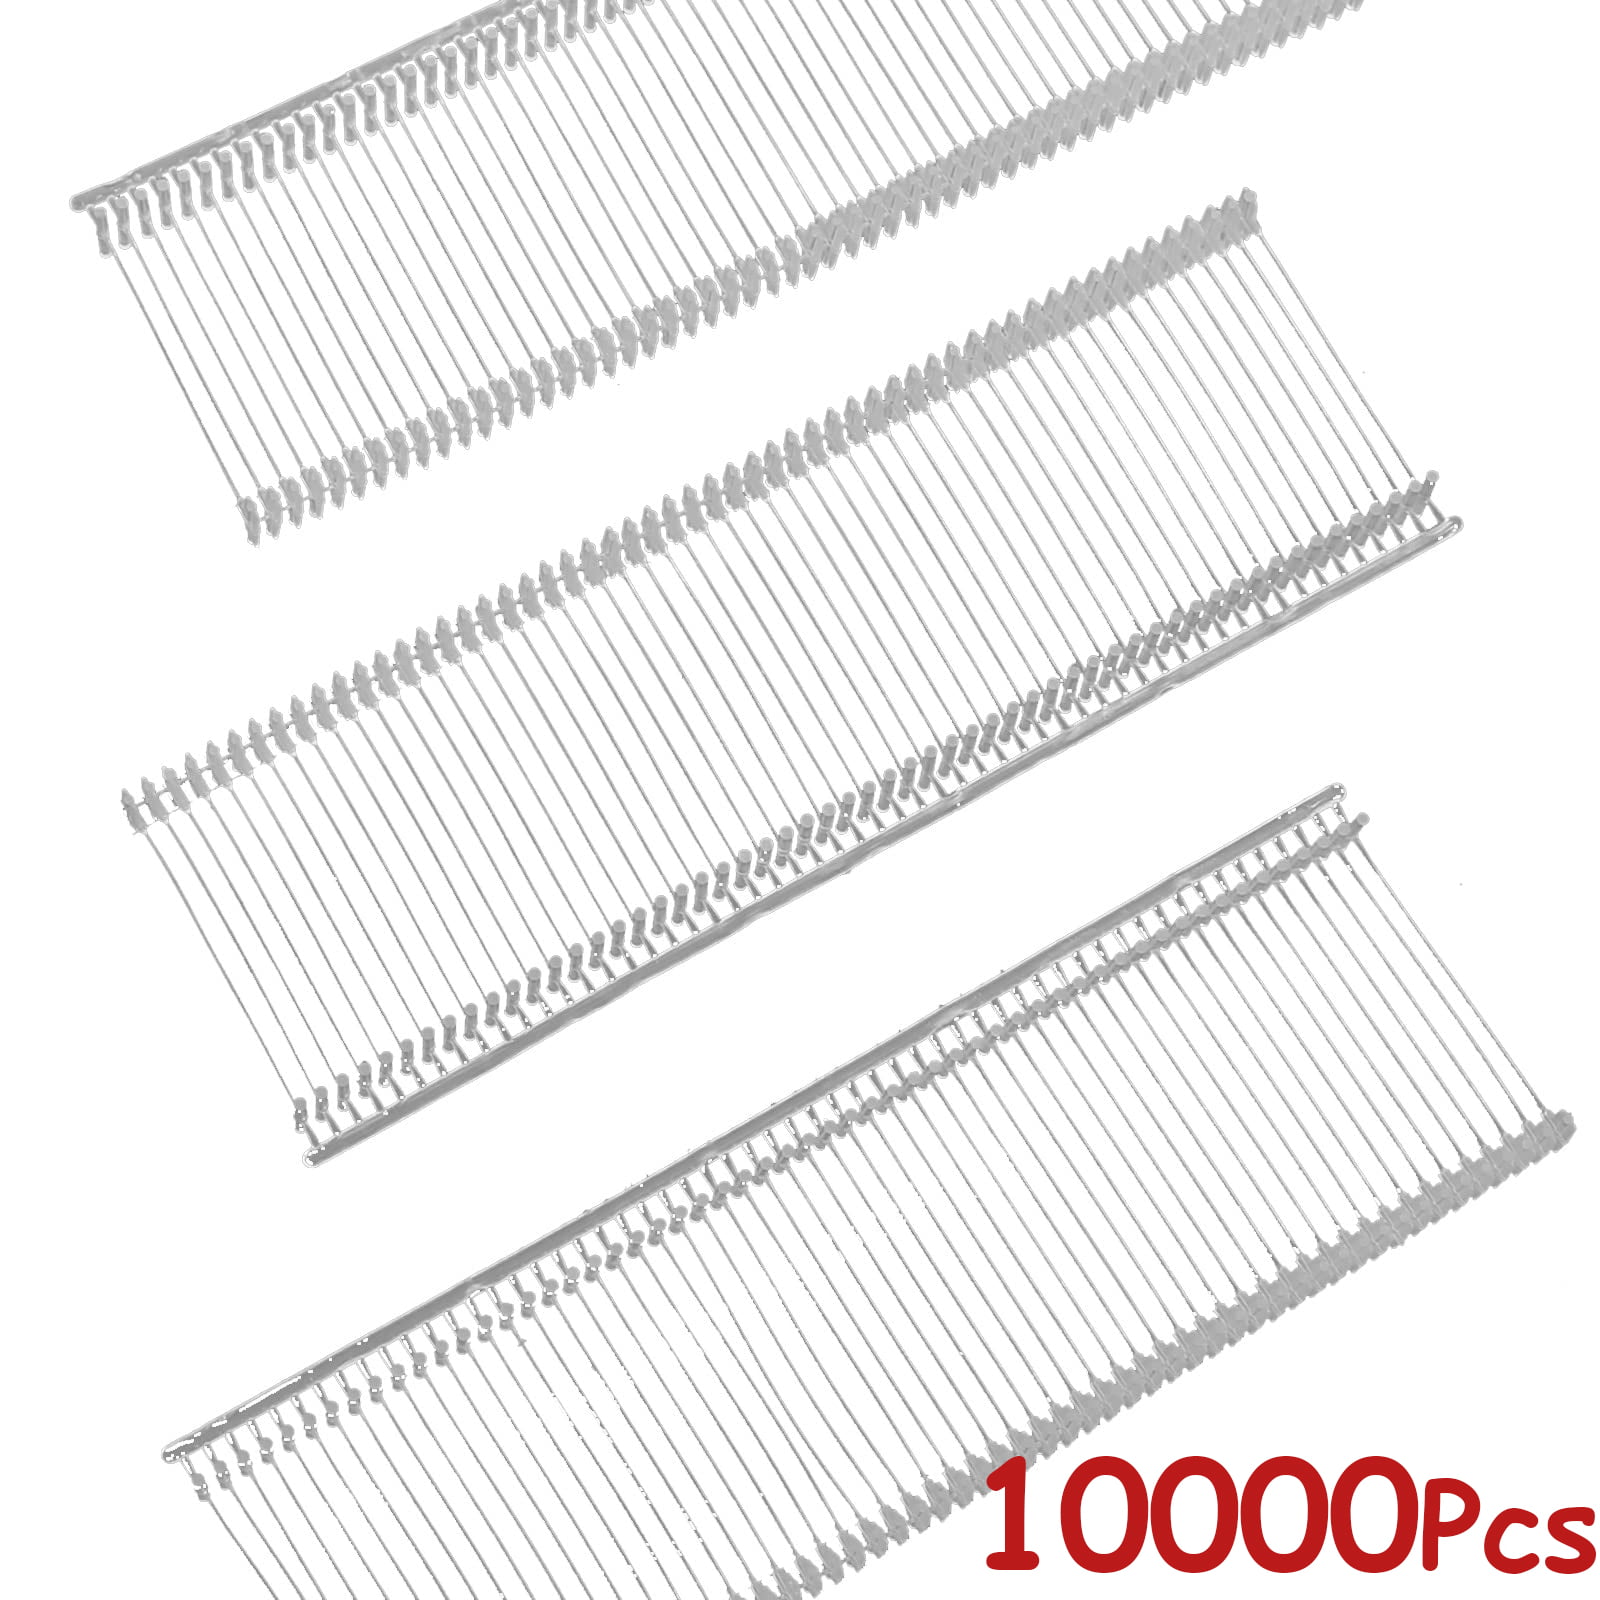 NEW 1000 PCS WHITE STANDARD PRICE TAG TAGGING TAGGER 1" PIN BARBS FASTENERS 1" 